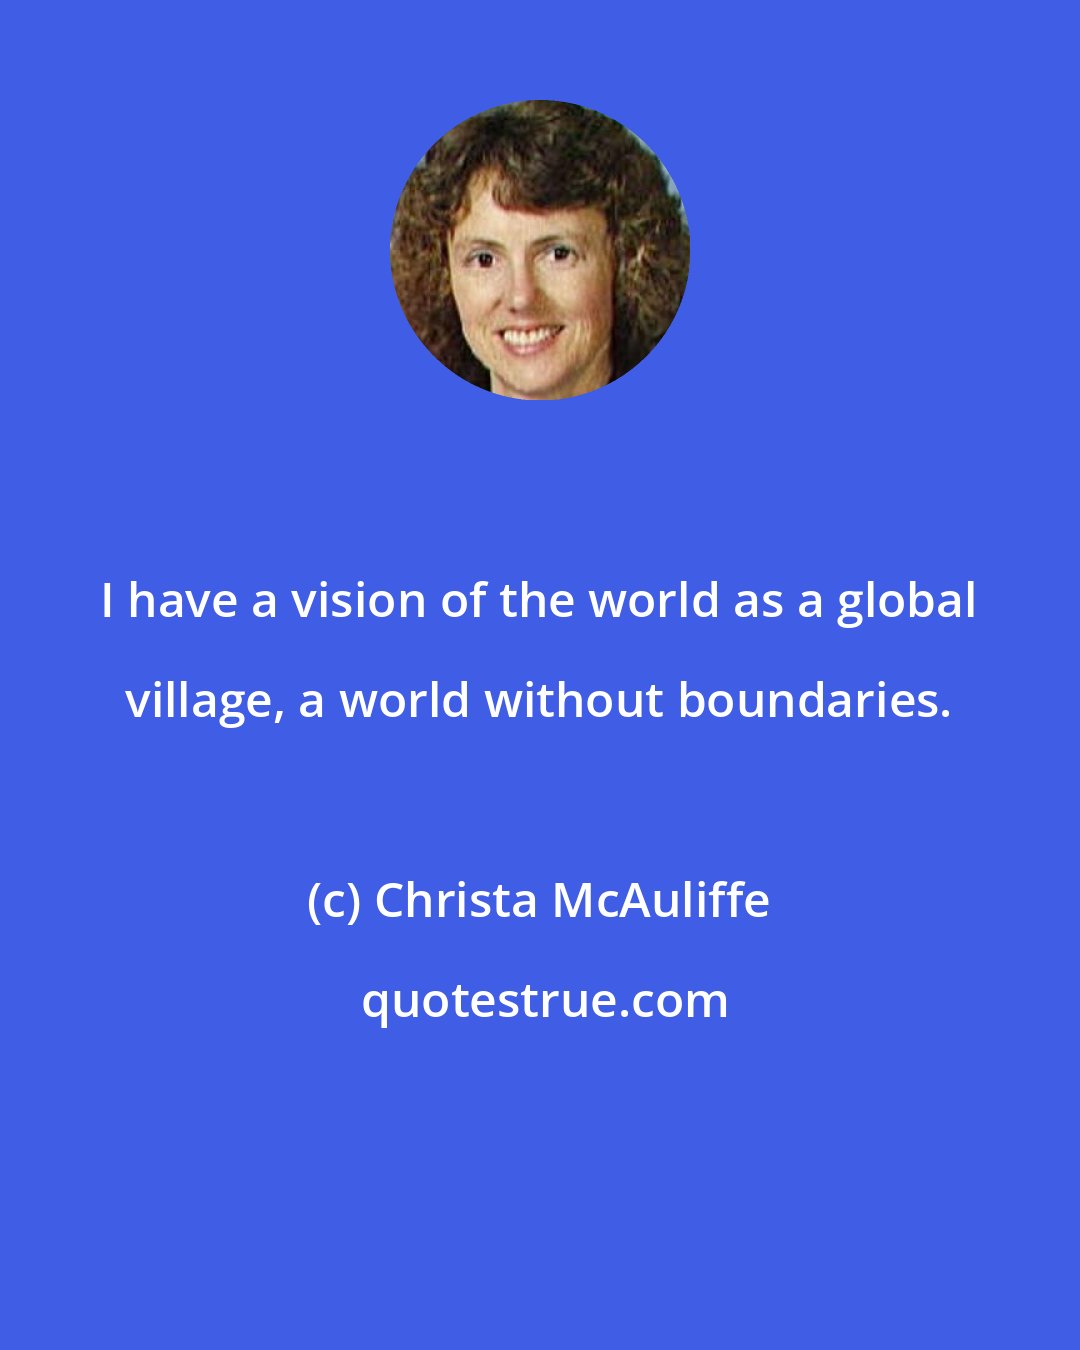 Christa McAuliffe: I have a vision of the world as a global village, a world without boundaries.